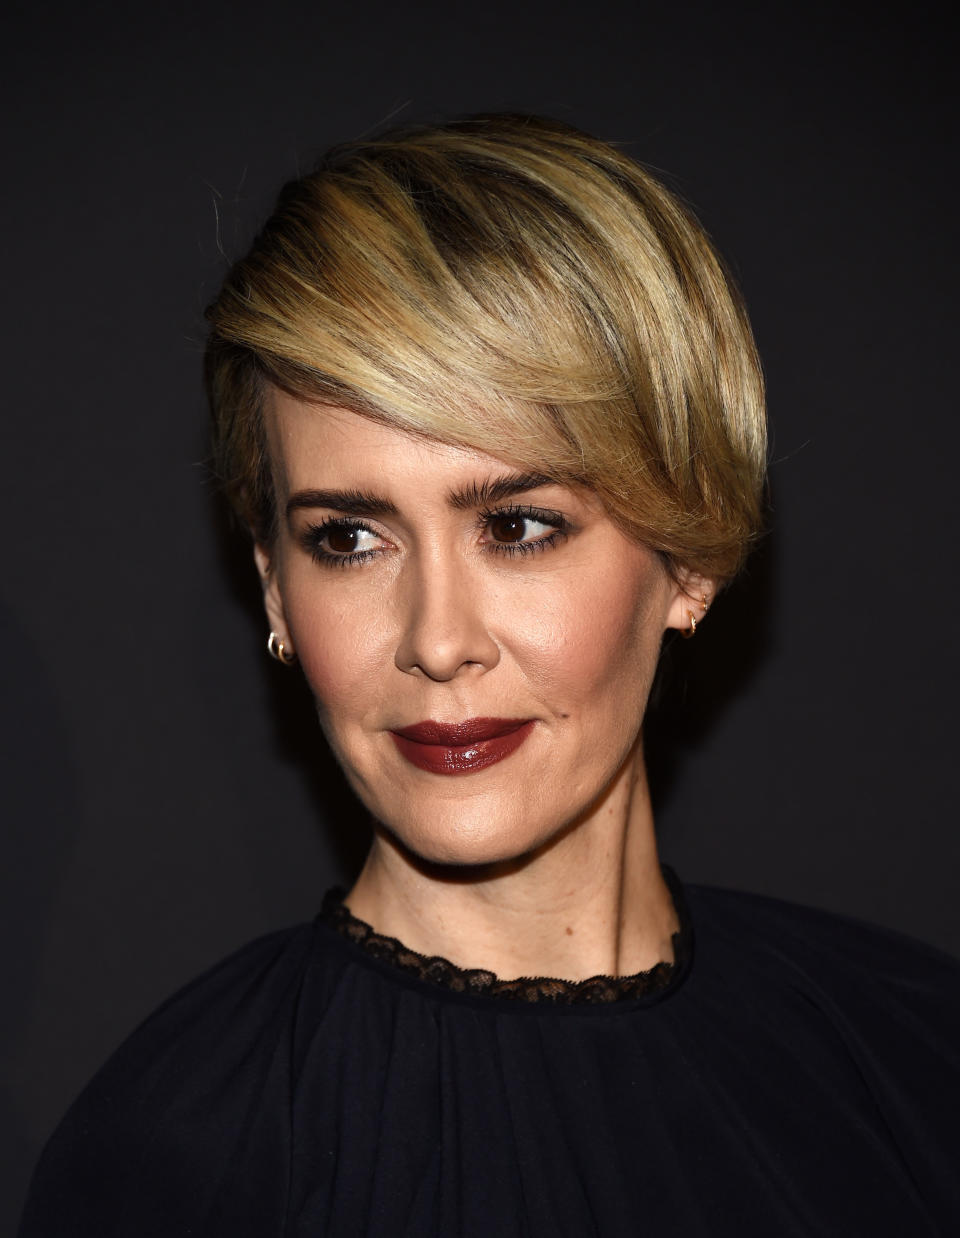 While she has not publicity identified with a label, Paulson waxed poetic about her <a href="http://www.huffingtonpost.com/entry/sarah-paulson-holland-taylor_us_56d73245e4b03260bf78f221">"surreal" romance with Holland Taylor</a>, who is 32 years her senior.&nbsp;<br /><br />&ldquo;There&rsquo;s a poignancy to being with someone older,&rdquo; she said. &ldquo;I think there&rsquo;s a greater appreciation of time and what you have together and what&rsquo;s important, and it can make the little things seem very small. It puts a kind of sharp light mixed with a sort of diffused light on something. I can&rsquo;t say it any other way than there&rsquo;s a poignancy to it, and a heightened sense of time and the value of time. What I can say absolutely is that I am in love, and that person happens to be Holland Taylor.&rdquo;<br /><br />(<a href="http://www.huffingtonpost.com/entry/sarah-paulson-holland-taylor-emmys_us_57df47f9e4b08cb140966c77">Ugh &lt;3</a>.)